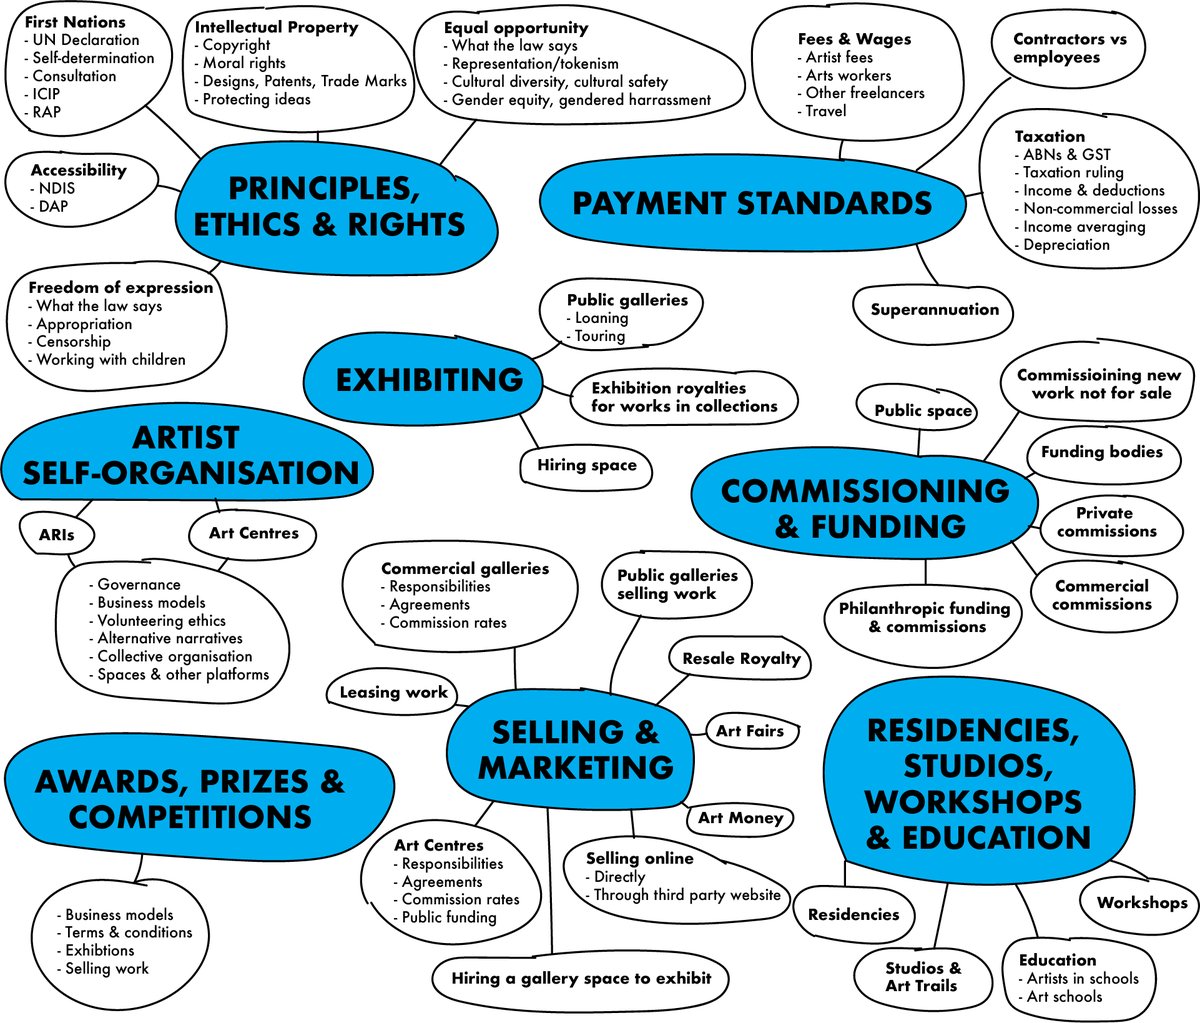 A layout of the headings and topics for the new Code of Practice